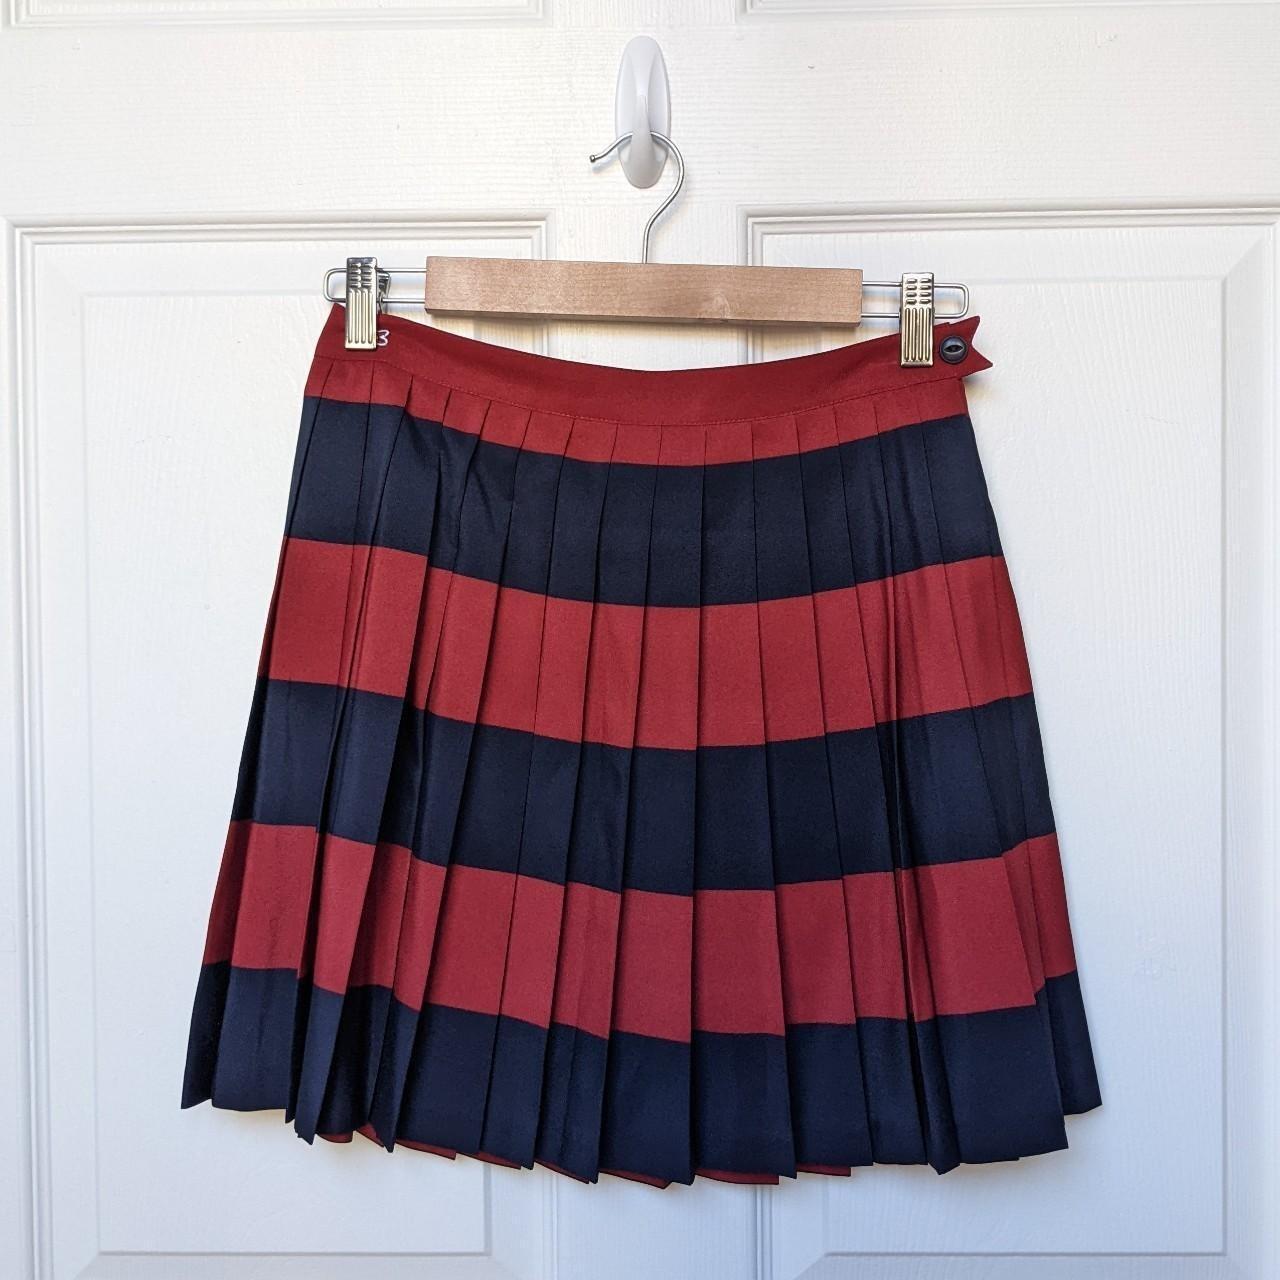 Lacoste Live Women's Red and Navy Skirt